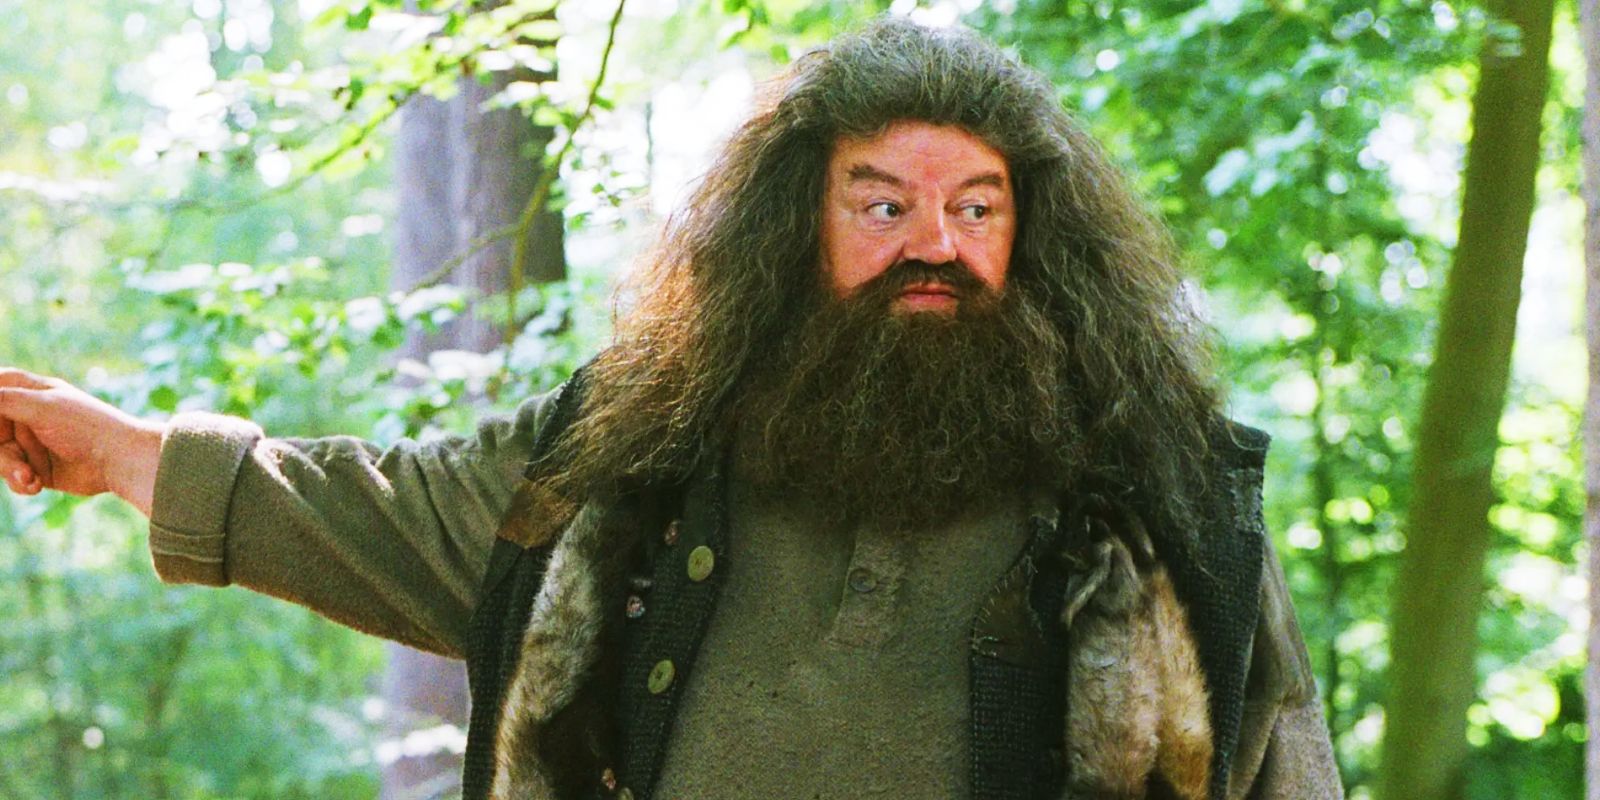 Robbie Coltrane as Hagrid in Harry Potter and the Prisoner of Azkaban